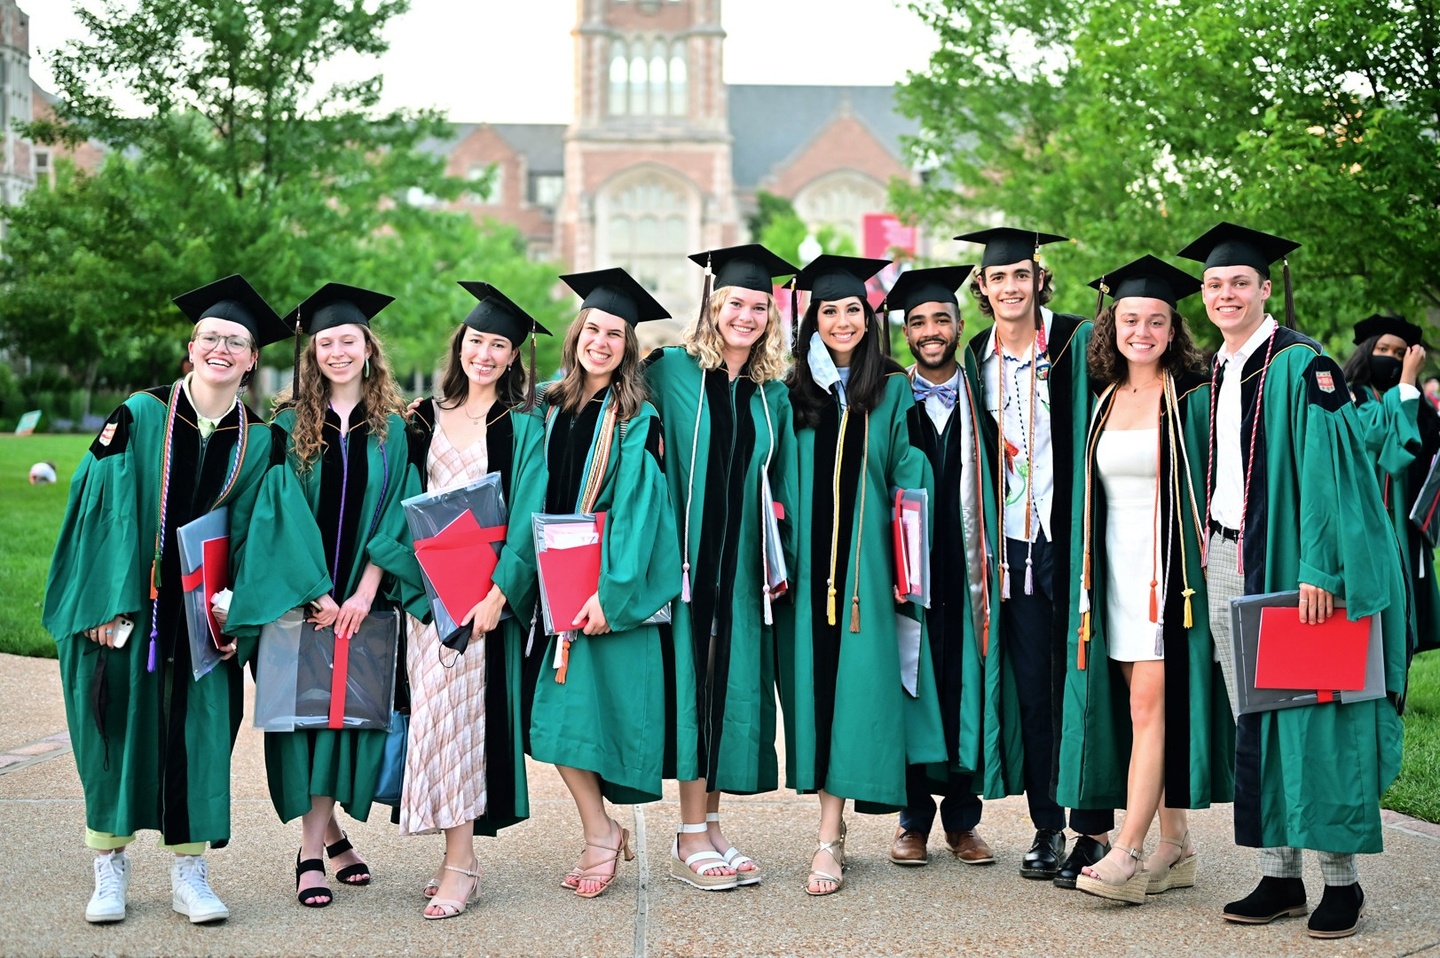 A group of students in green commencement gowns and black mortar boards poses together, with a Collegiate Gothic style building and leafy green trees in the background.